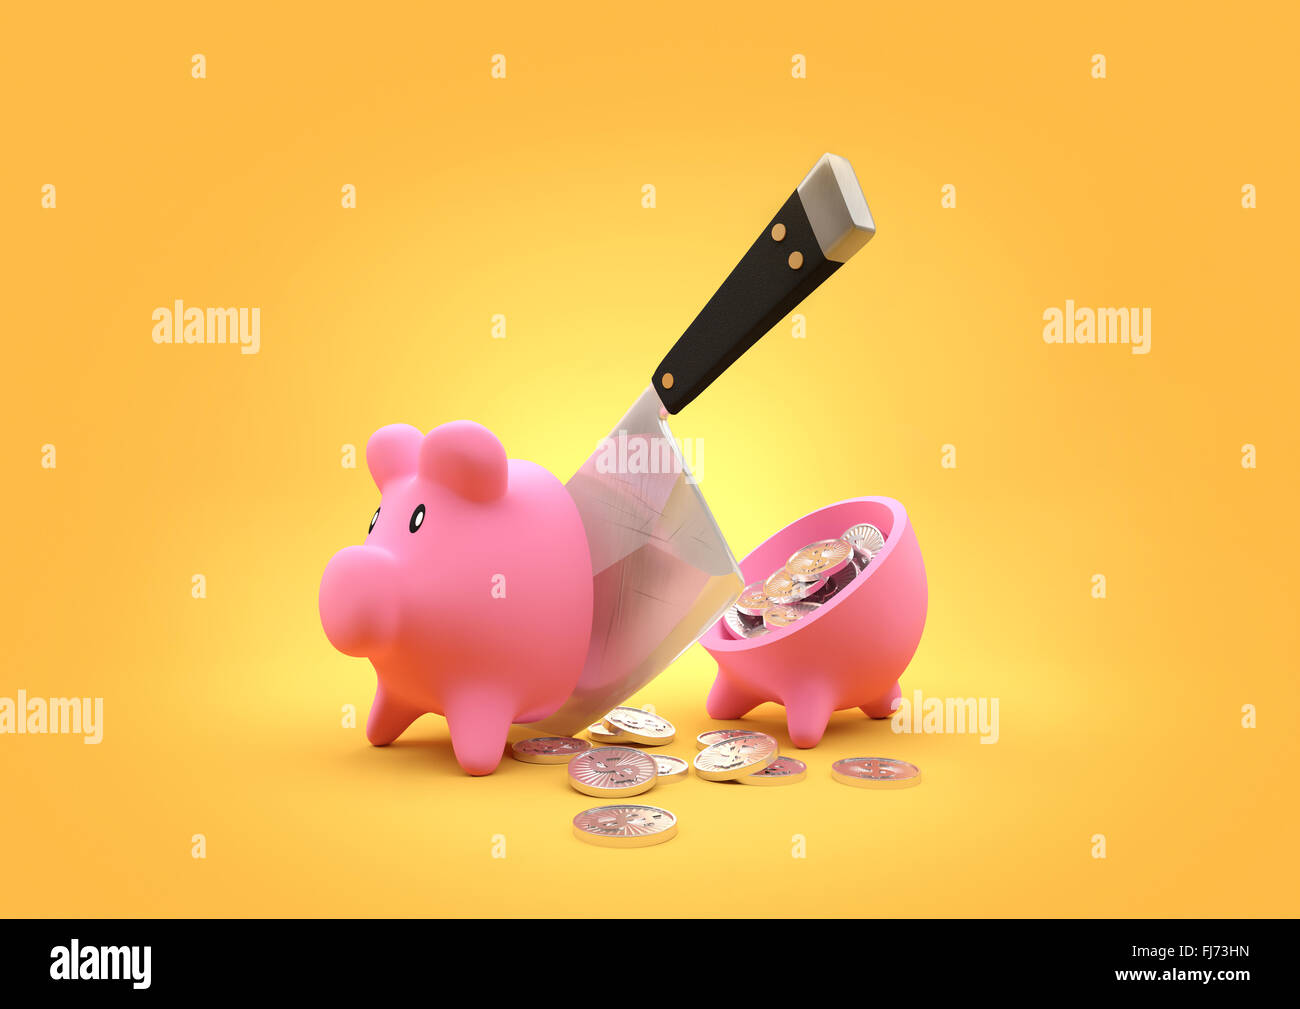 slashed Savings. A piggy bank cut in half with a butchers cleaver. Money concept. Stock Photo